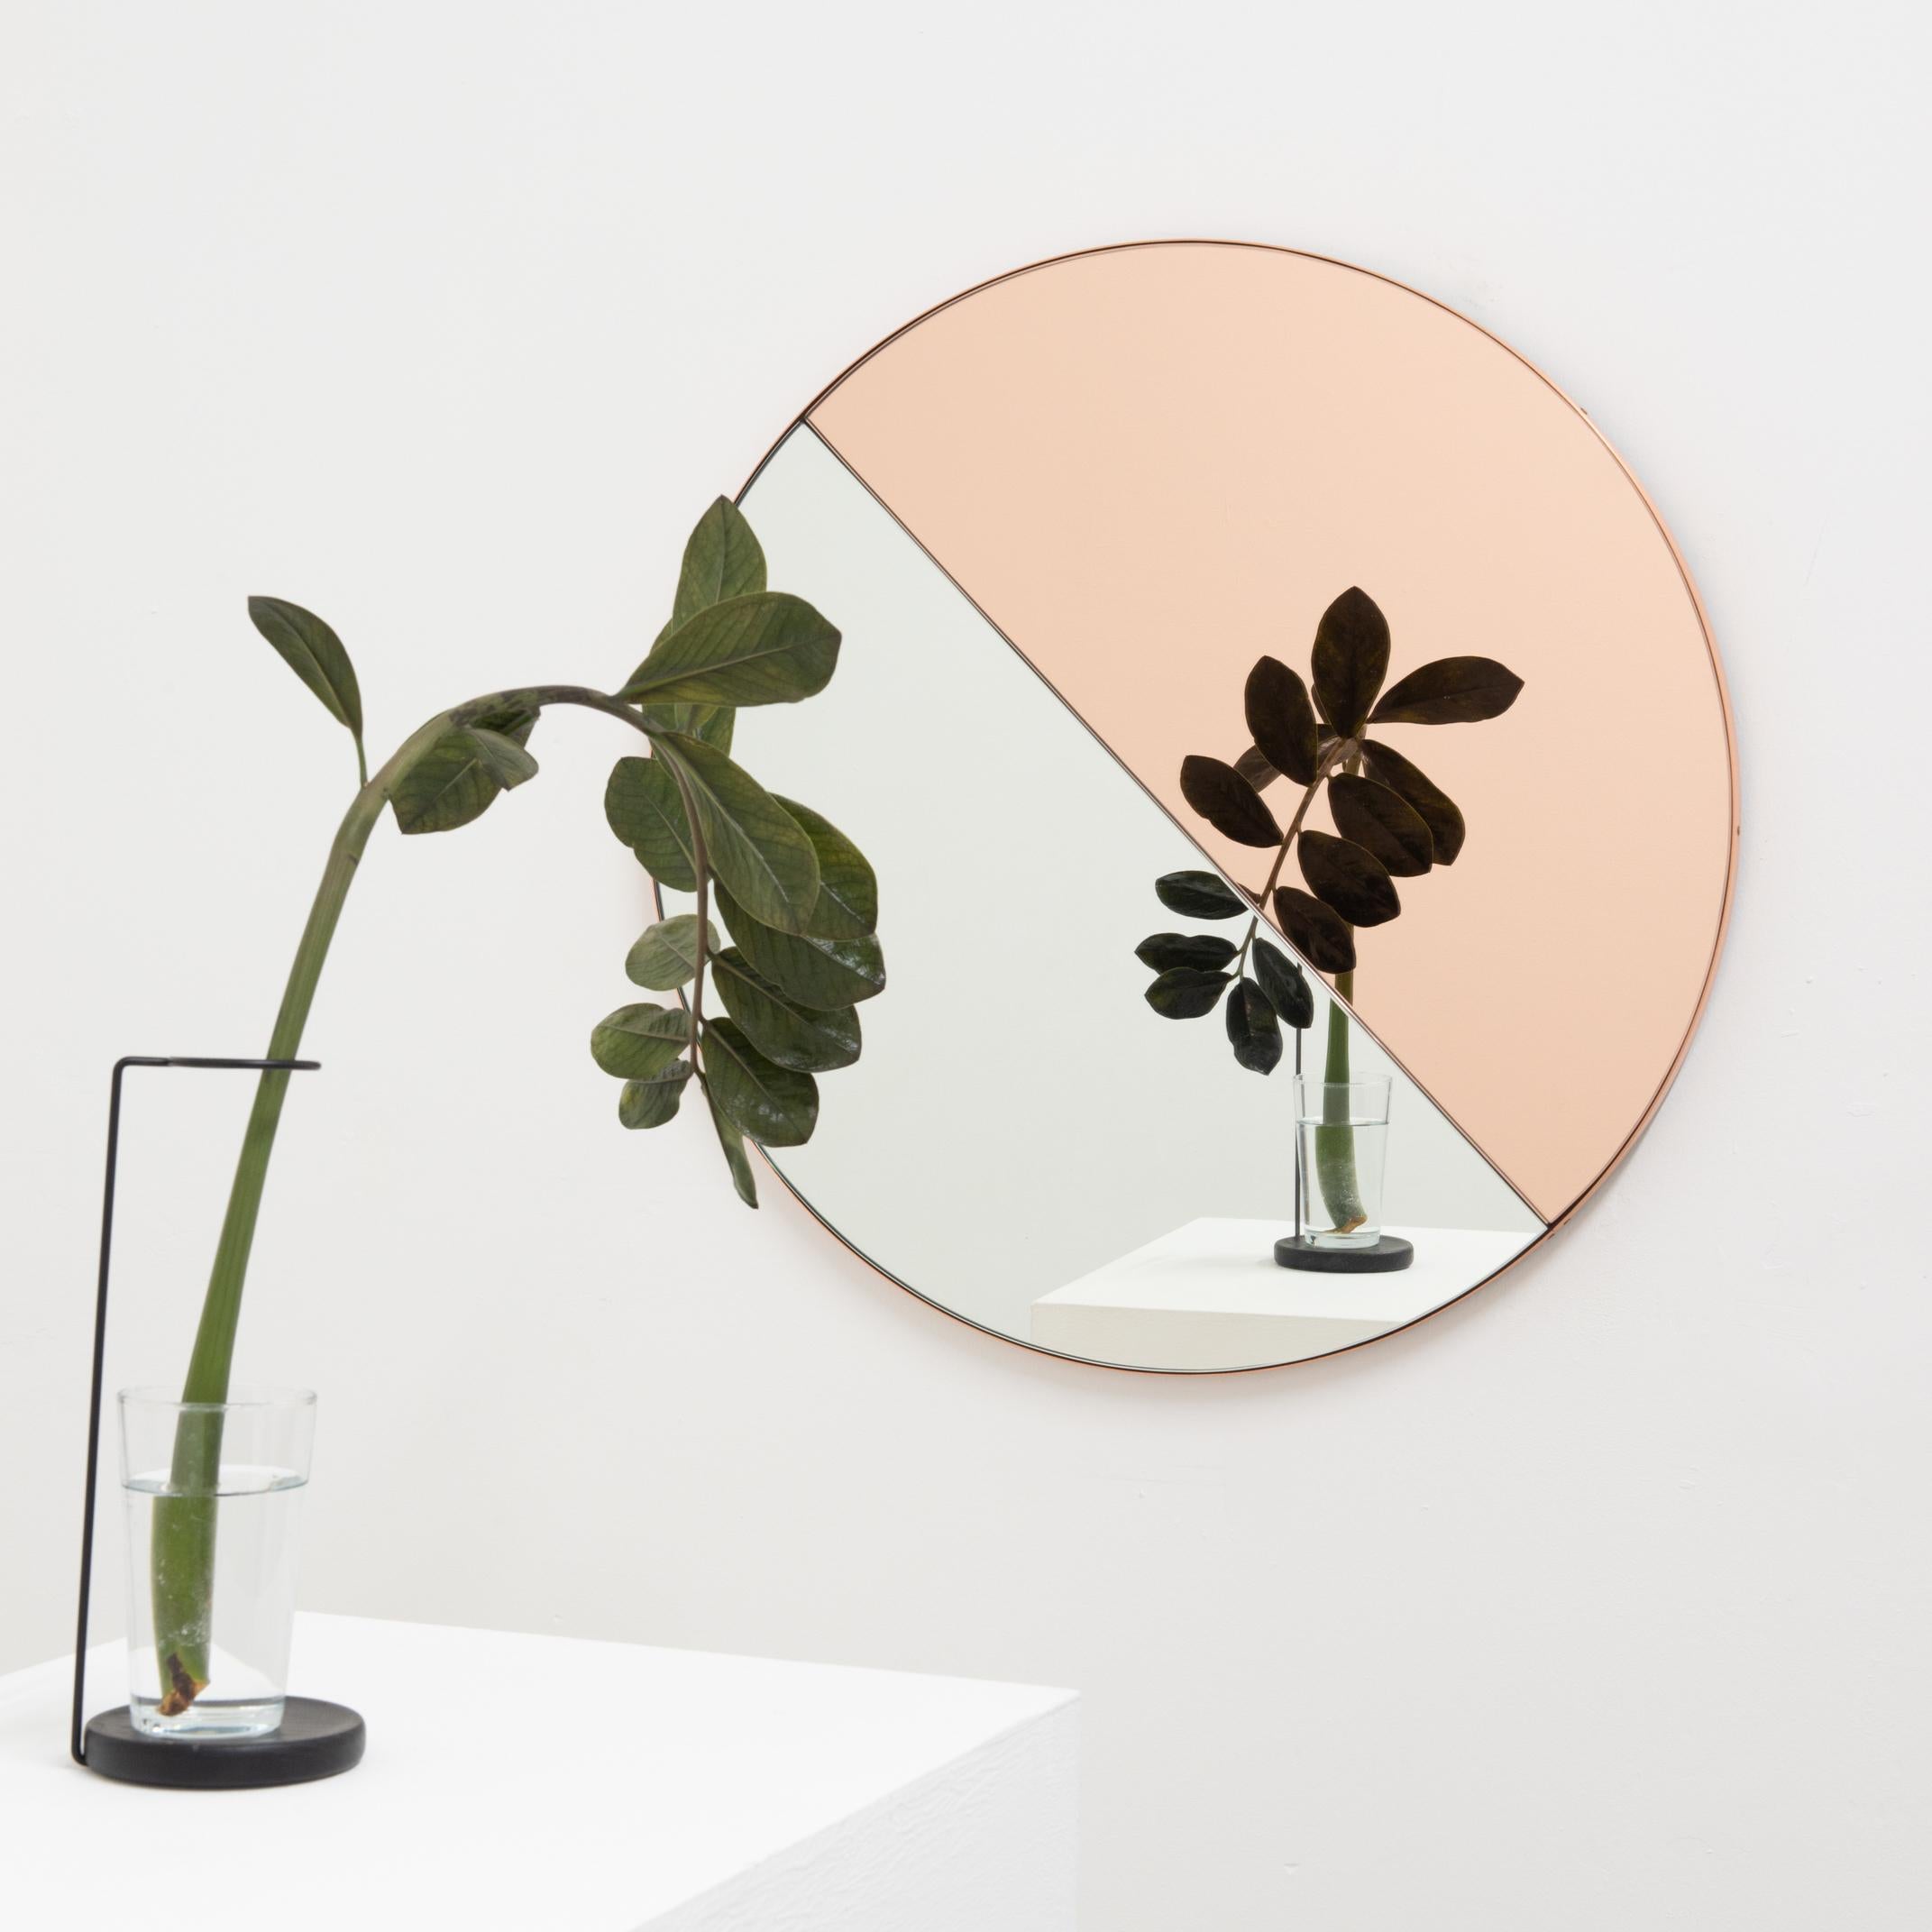 Contemporary mixed tinted (silver & rose gold / peach) Orbis Dualis mirror with a chic copper frame. Designed and handcrafted in London, UK.

All mirrors are fitted with an ingenious French cleat (split batten) system so they may hang flush with the